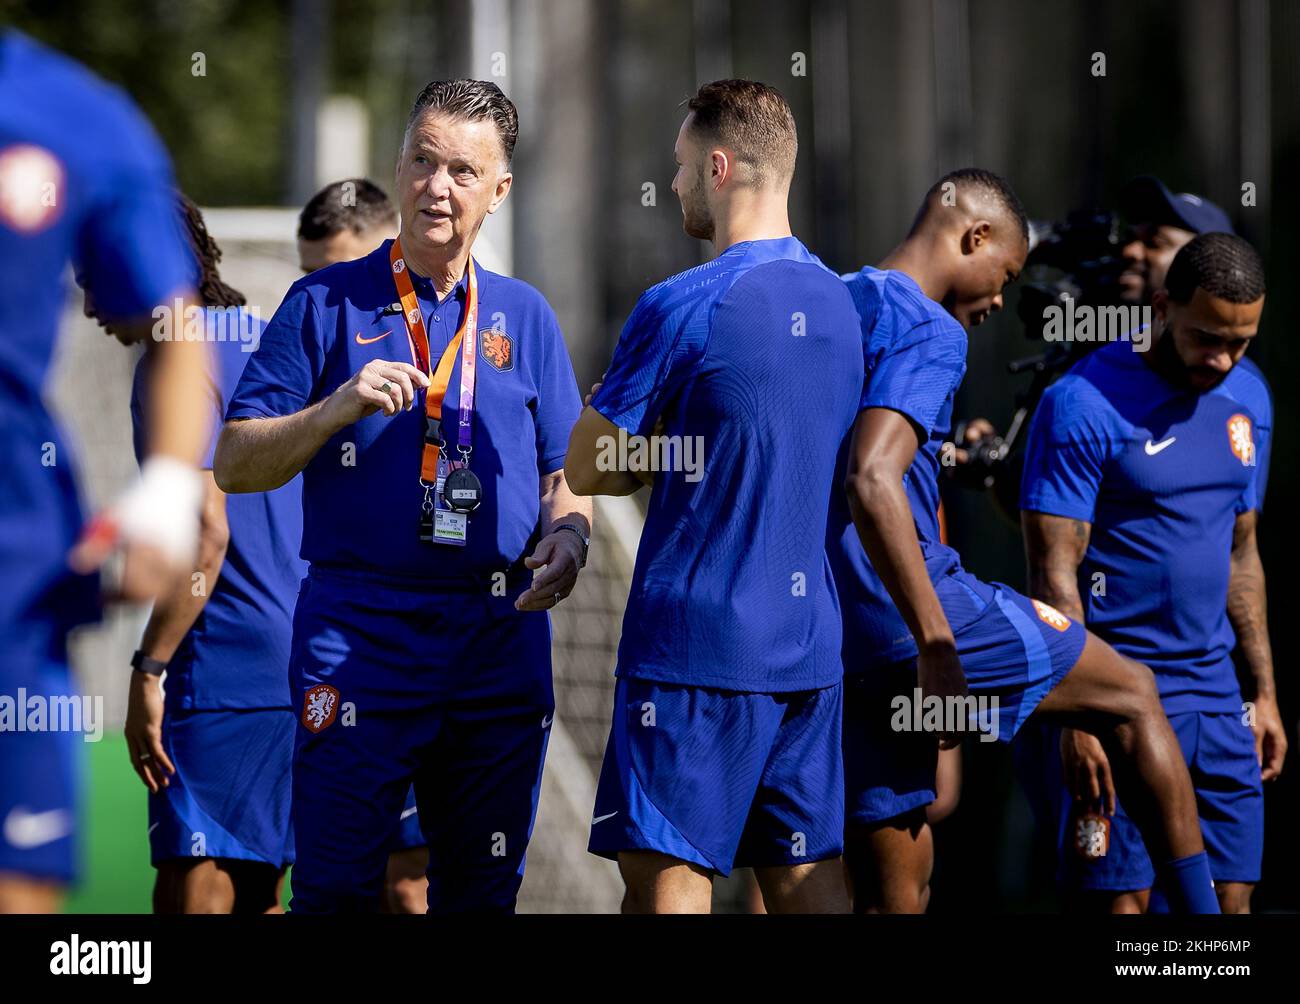 DOHA - Holland coach Louis van Gaal and Teun Koopmeiners of Holland during a training session of the Dutch national team at the Qatar University training complex on November 24, 2022 in Doha, Qatar. The Dutch national team is preparing for the World Cup match against Ecuador. ANP KOEN VAN WEEL Stock Photo